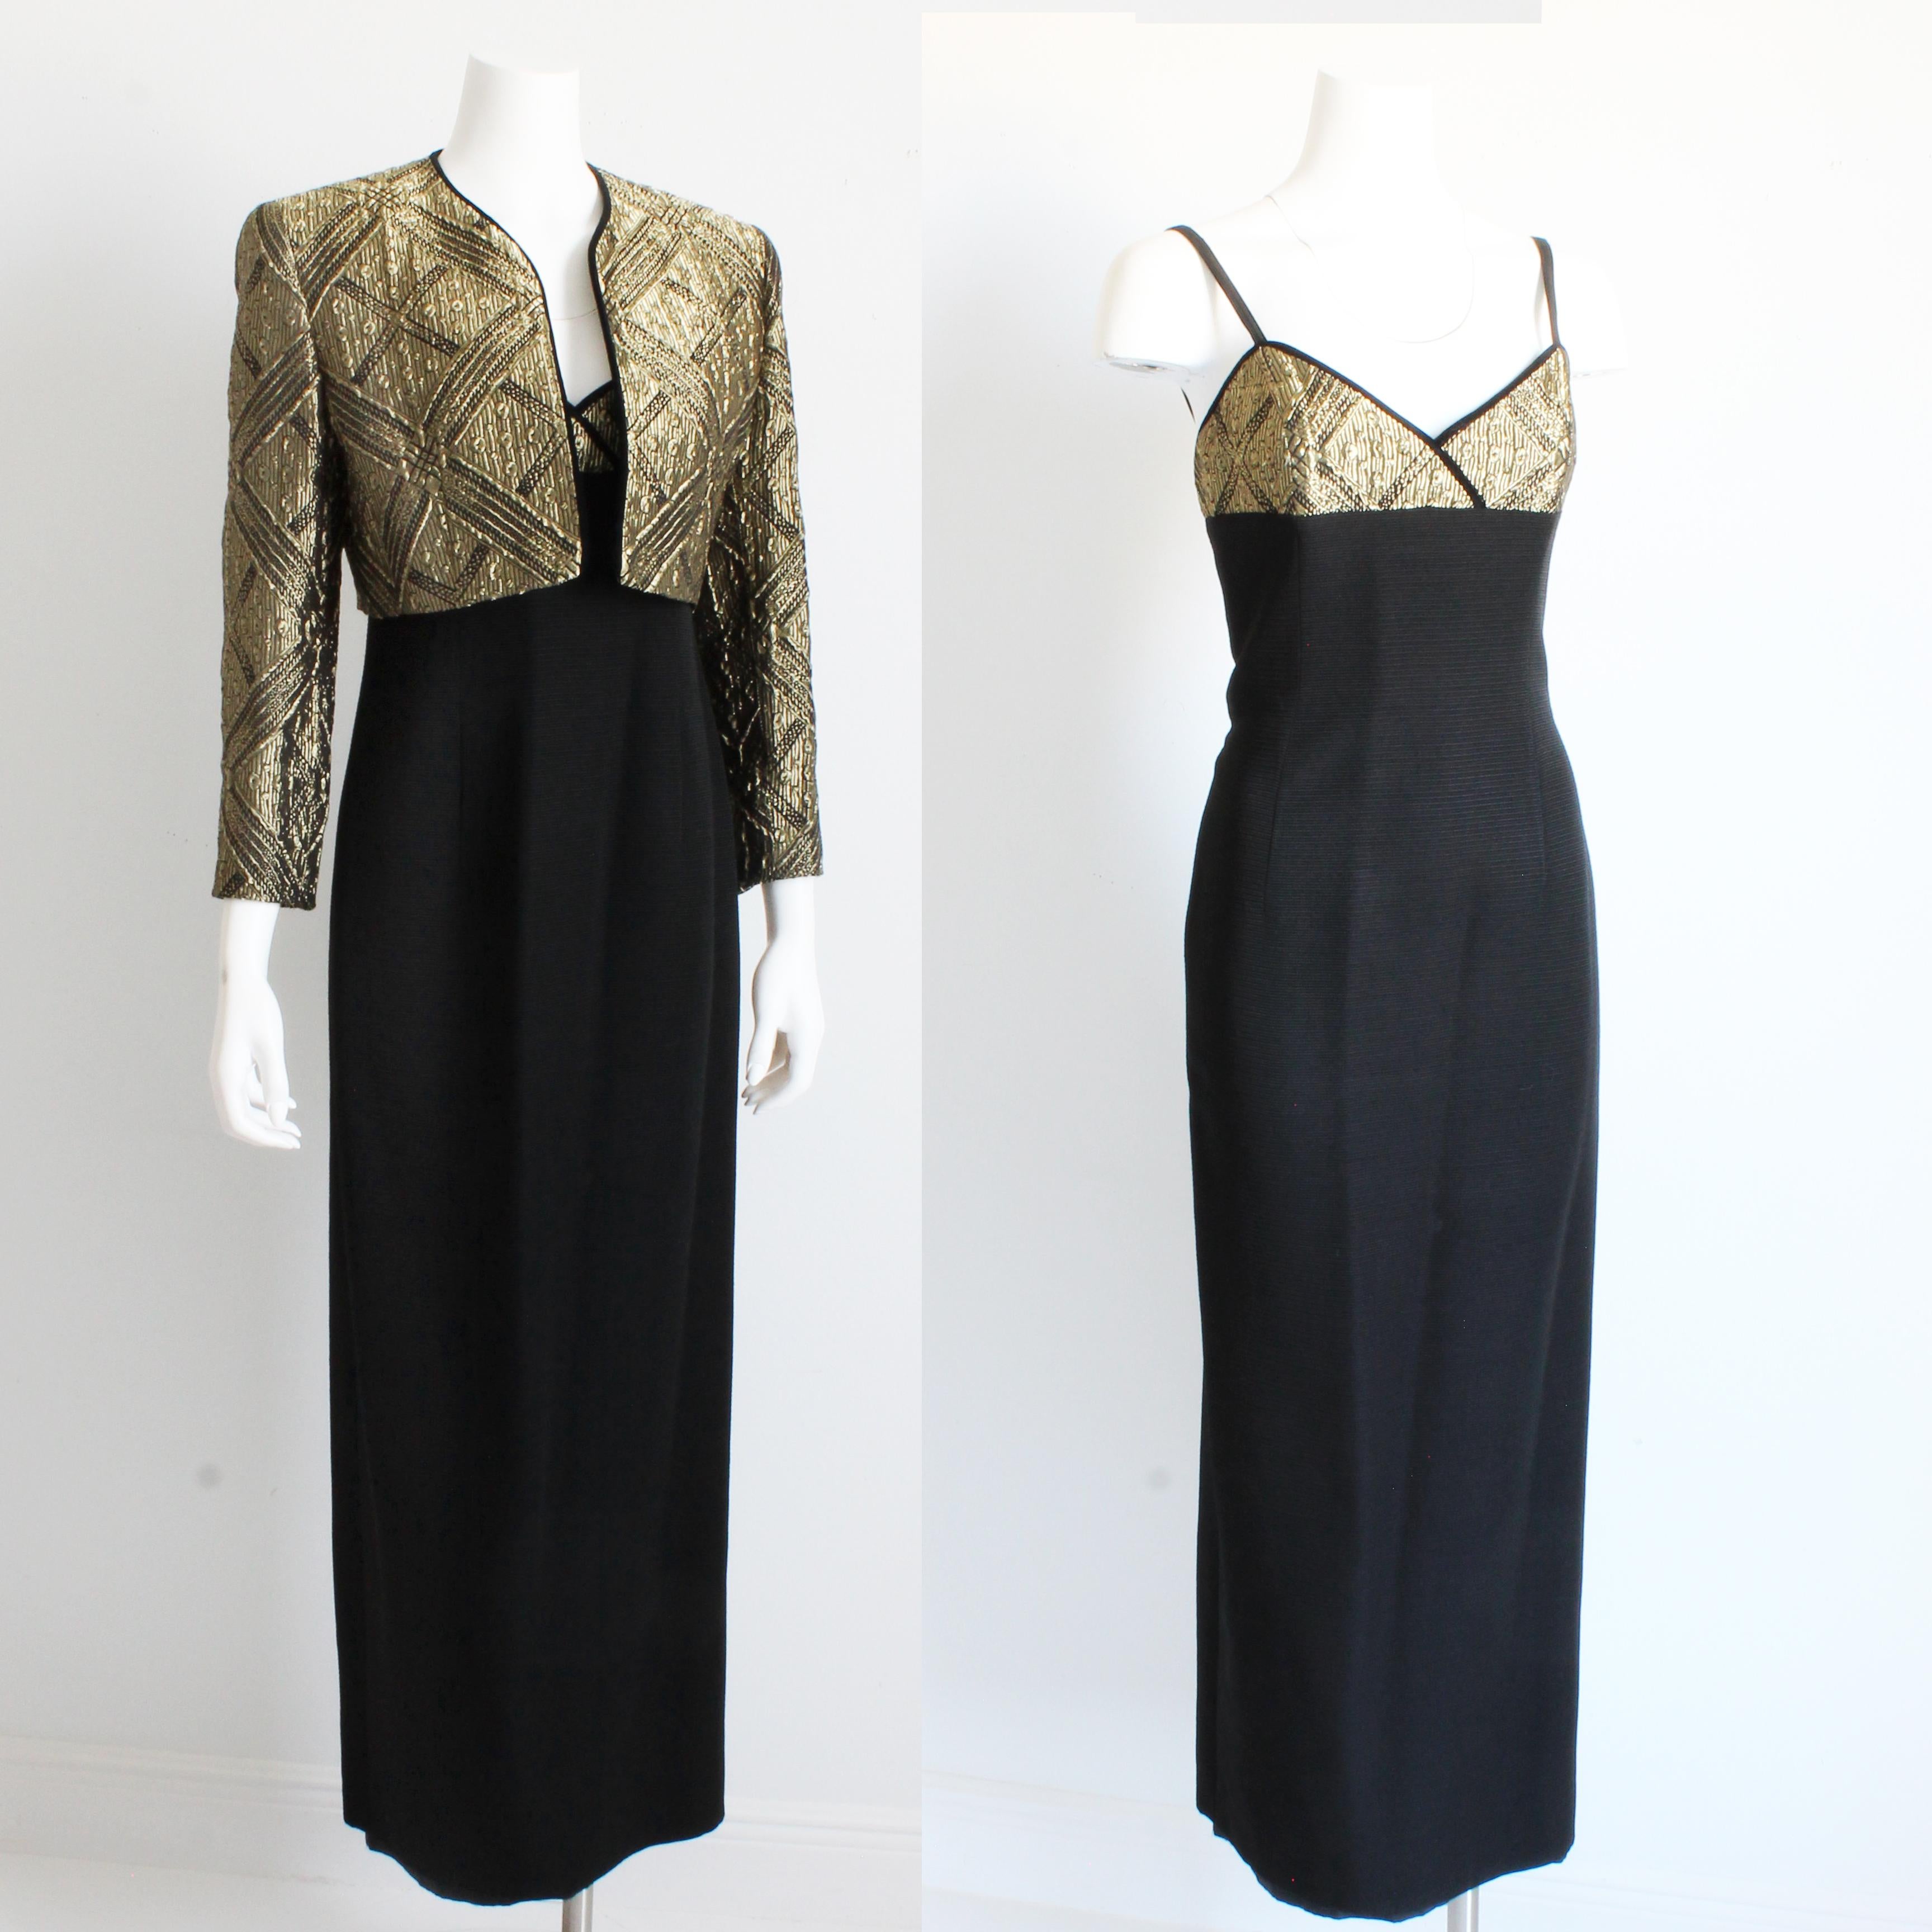 Authentic, preowned, vintage Louis Feraud evening gown and jacket 2pc set, sold by high end boutique Isaacson's in Atlanta, most likely in the early 90s. The open cropped jacket is made from an acetate/polyester/viscose blend fabric in black and